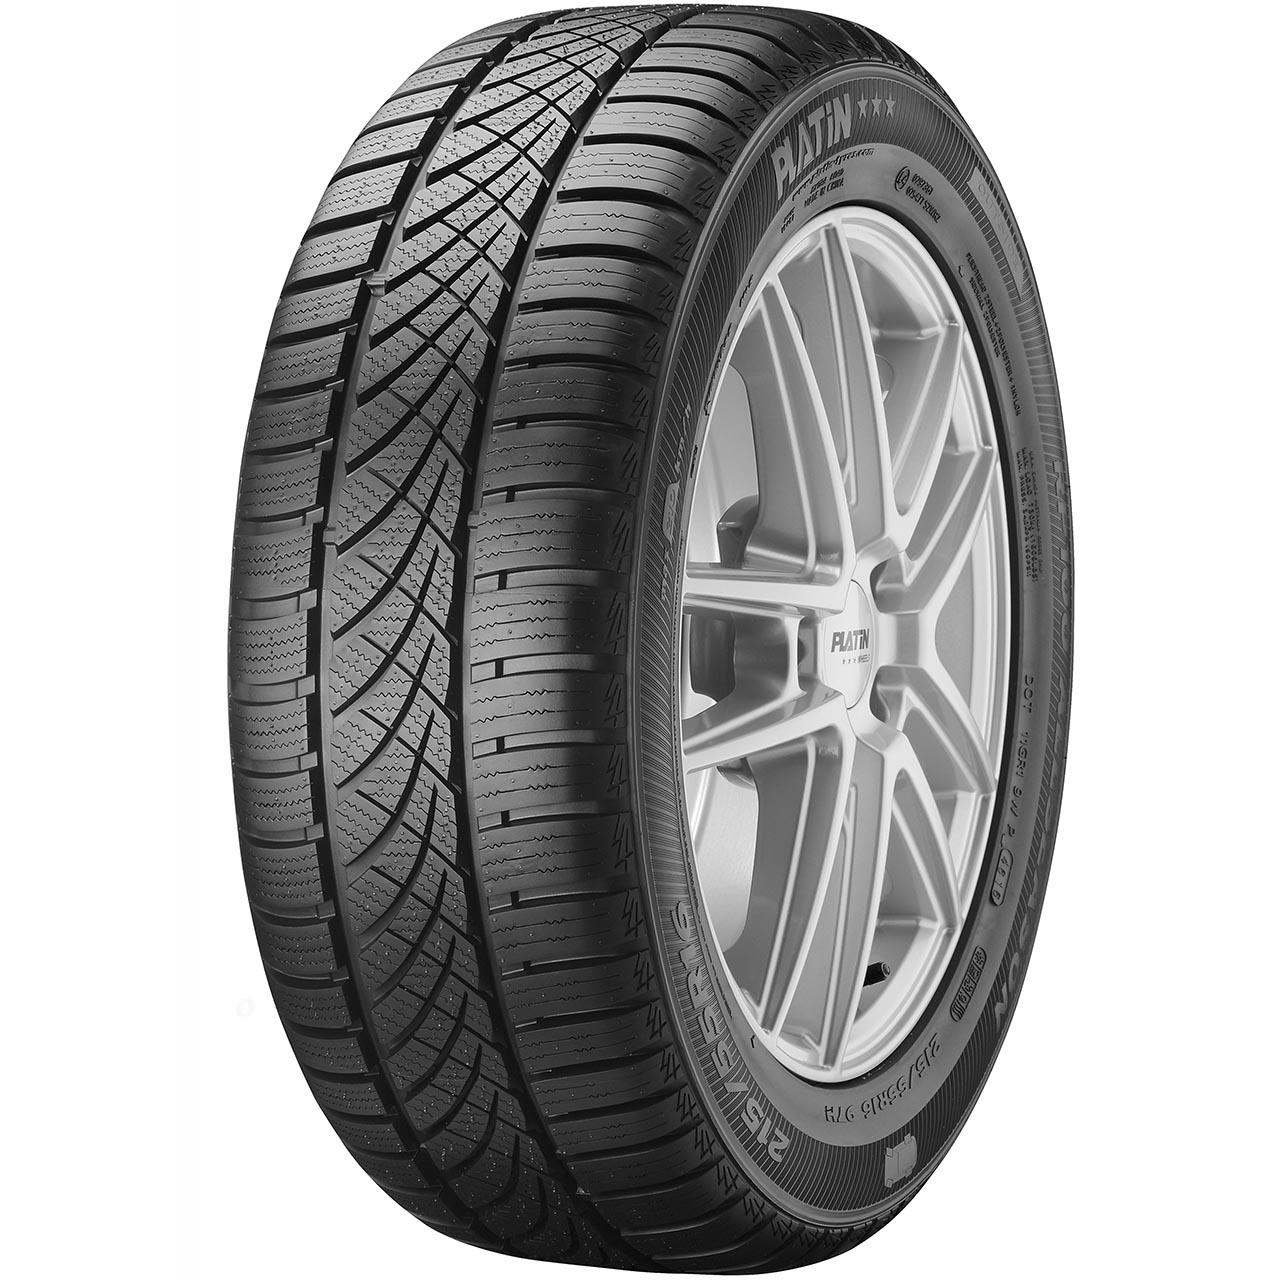 Gomme Nuove Platin 205/55 R17 95V RP100 AS M+S pneumatici nuovi All Season